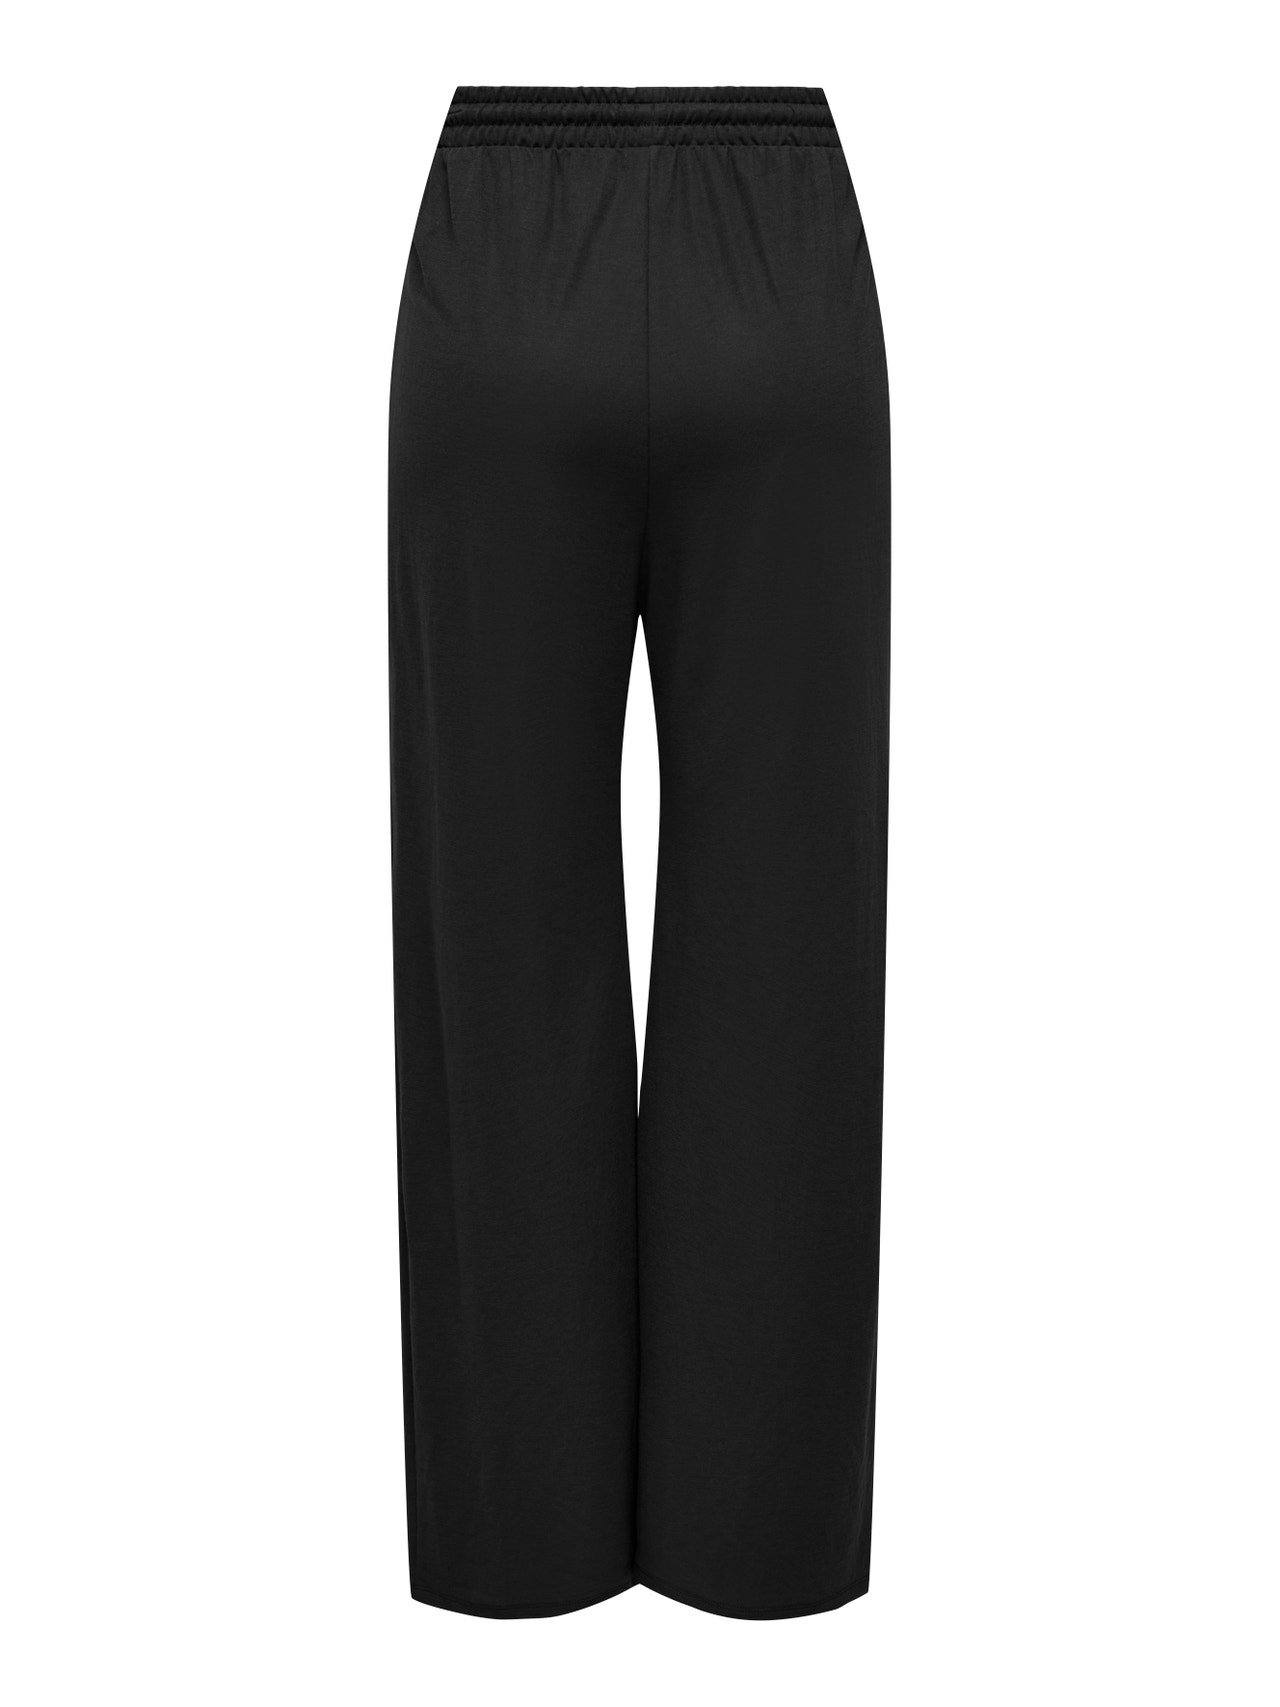 ONLY Regular Fit Trousers -Black - 15294429